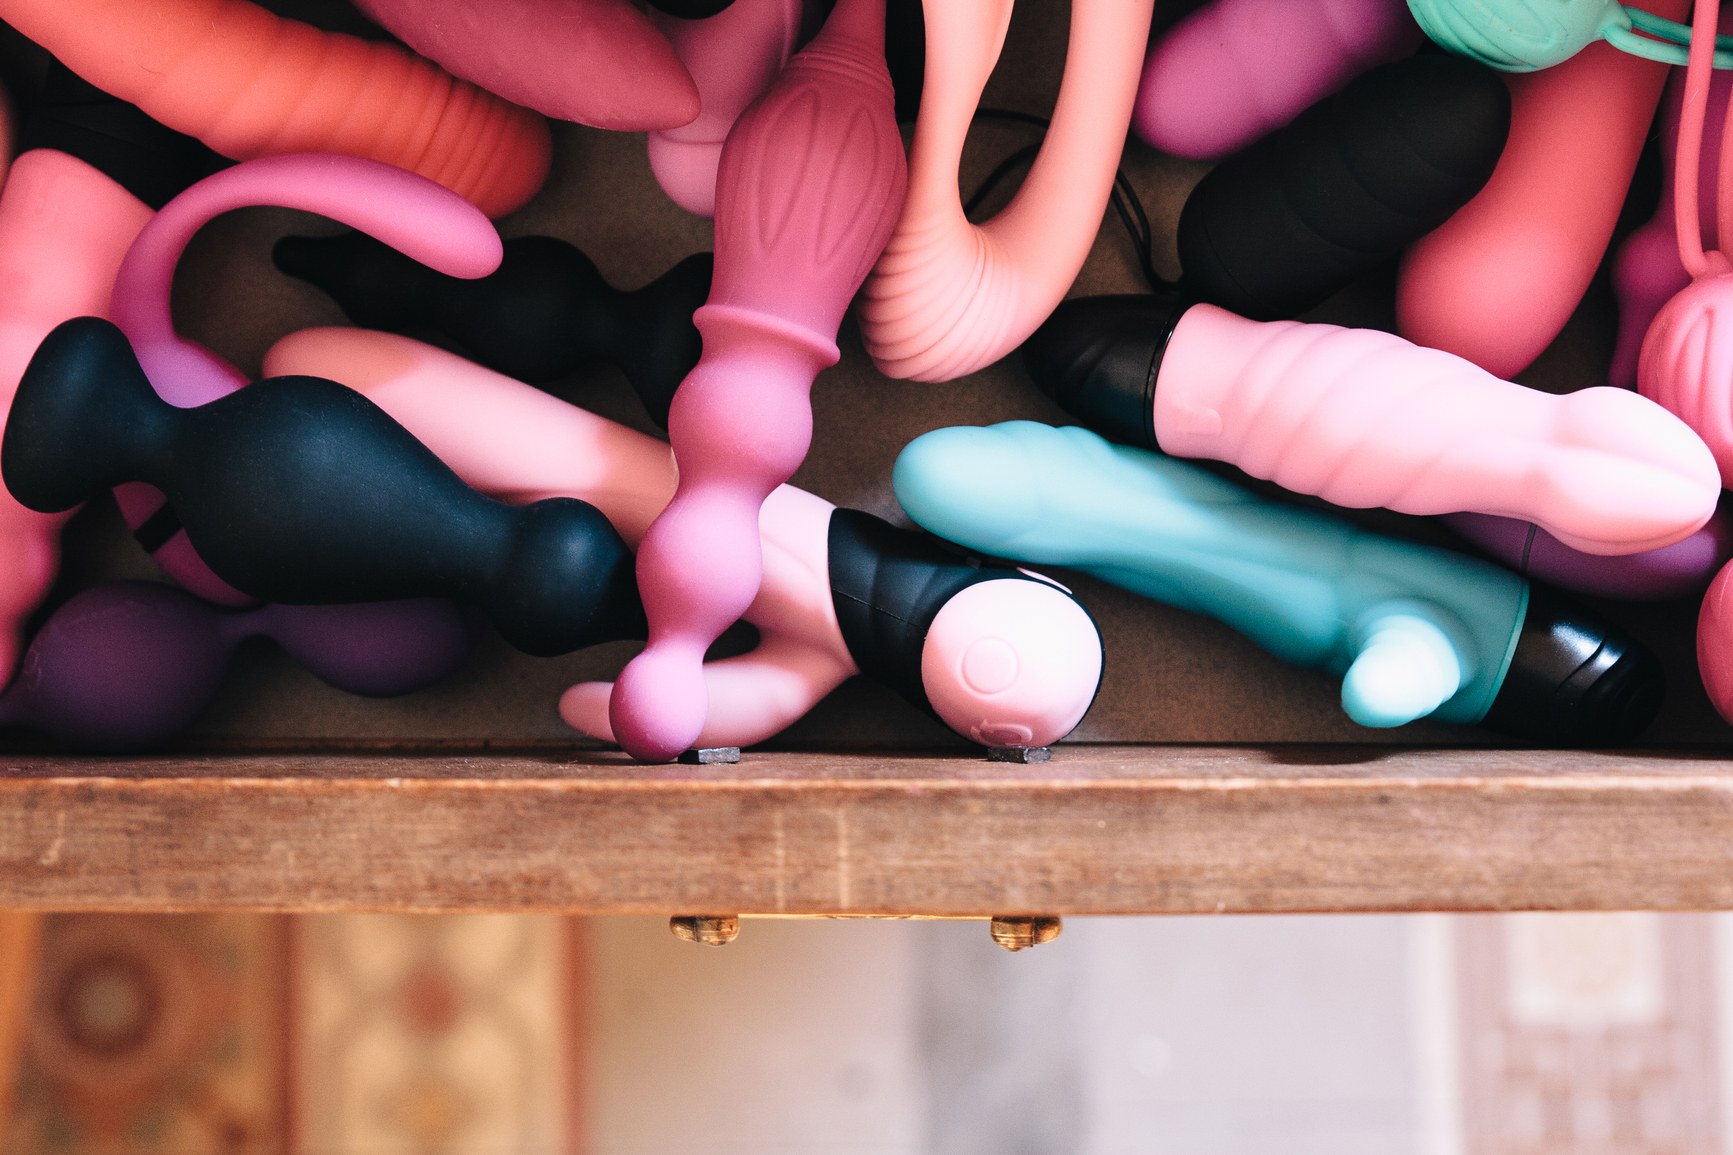 Sex toys and stis